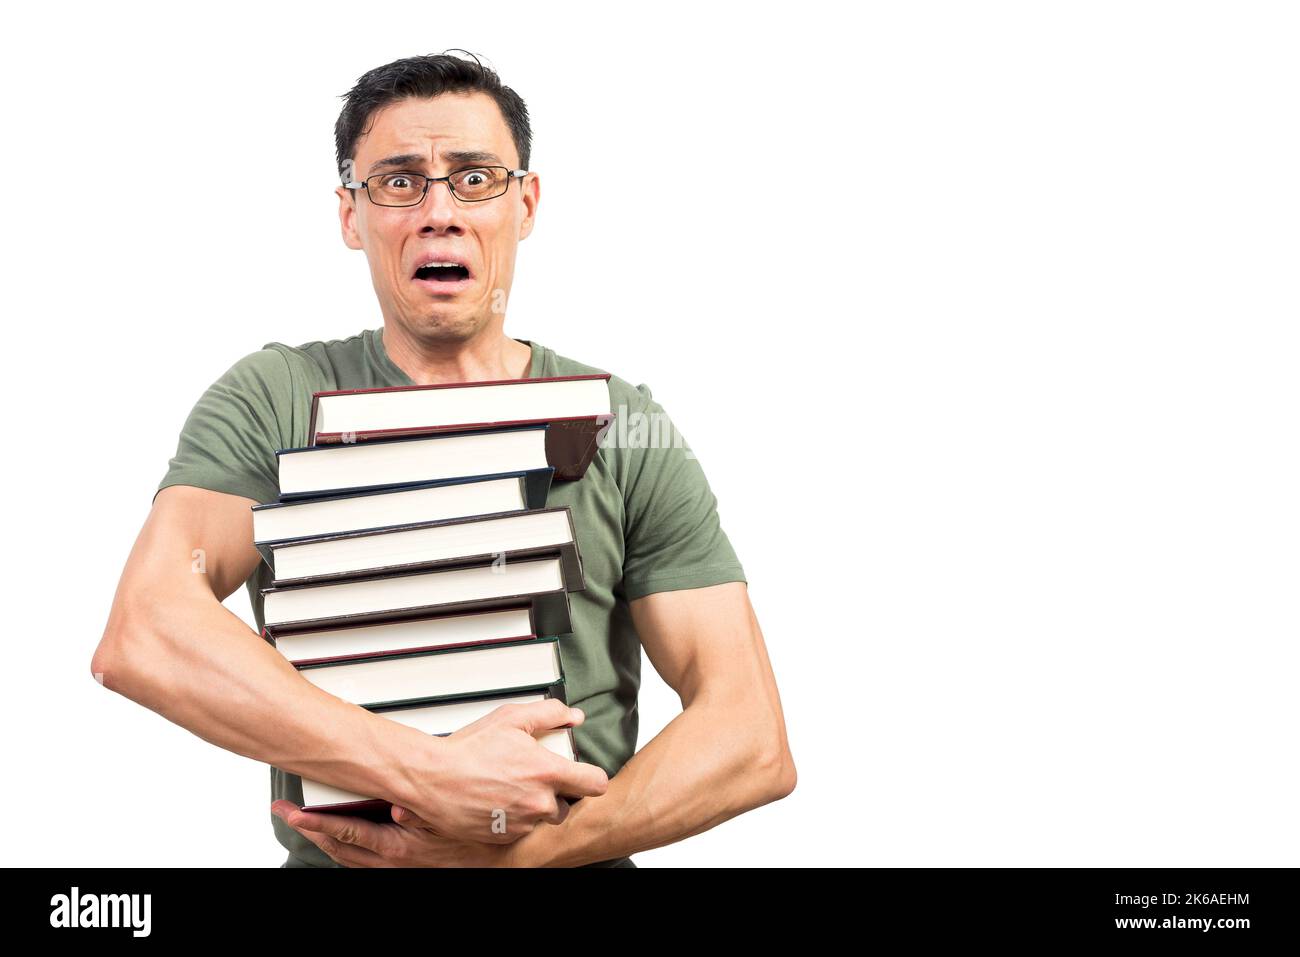 Scared male student with books looking at camera Stock Photo